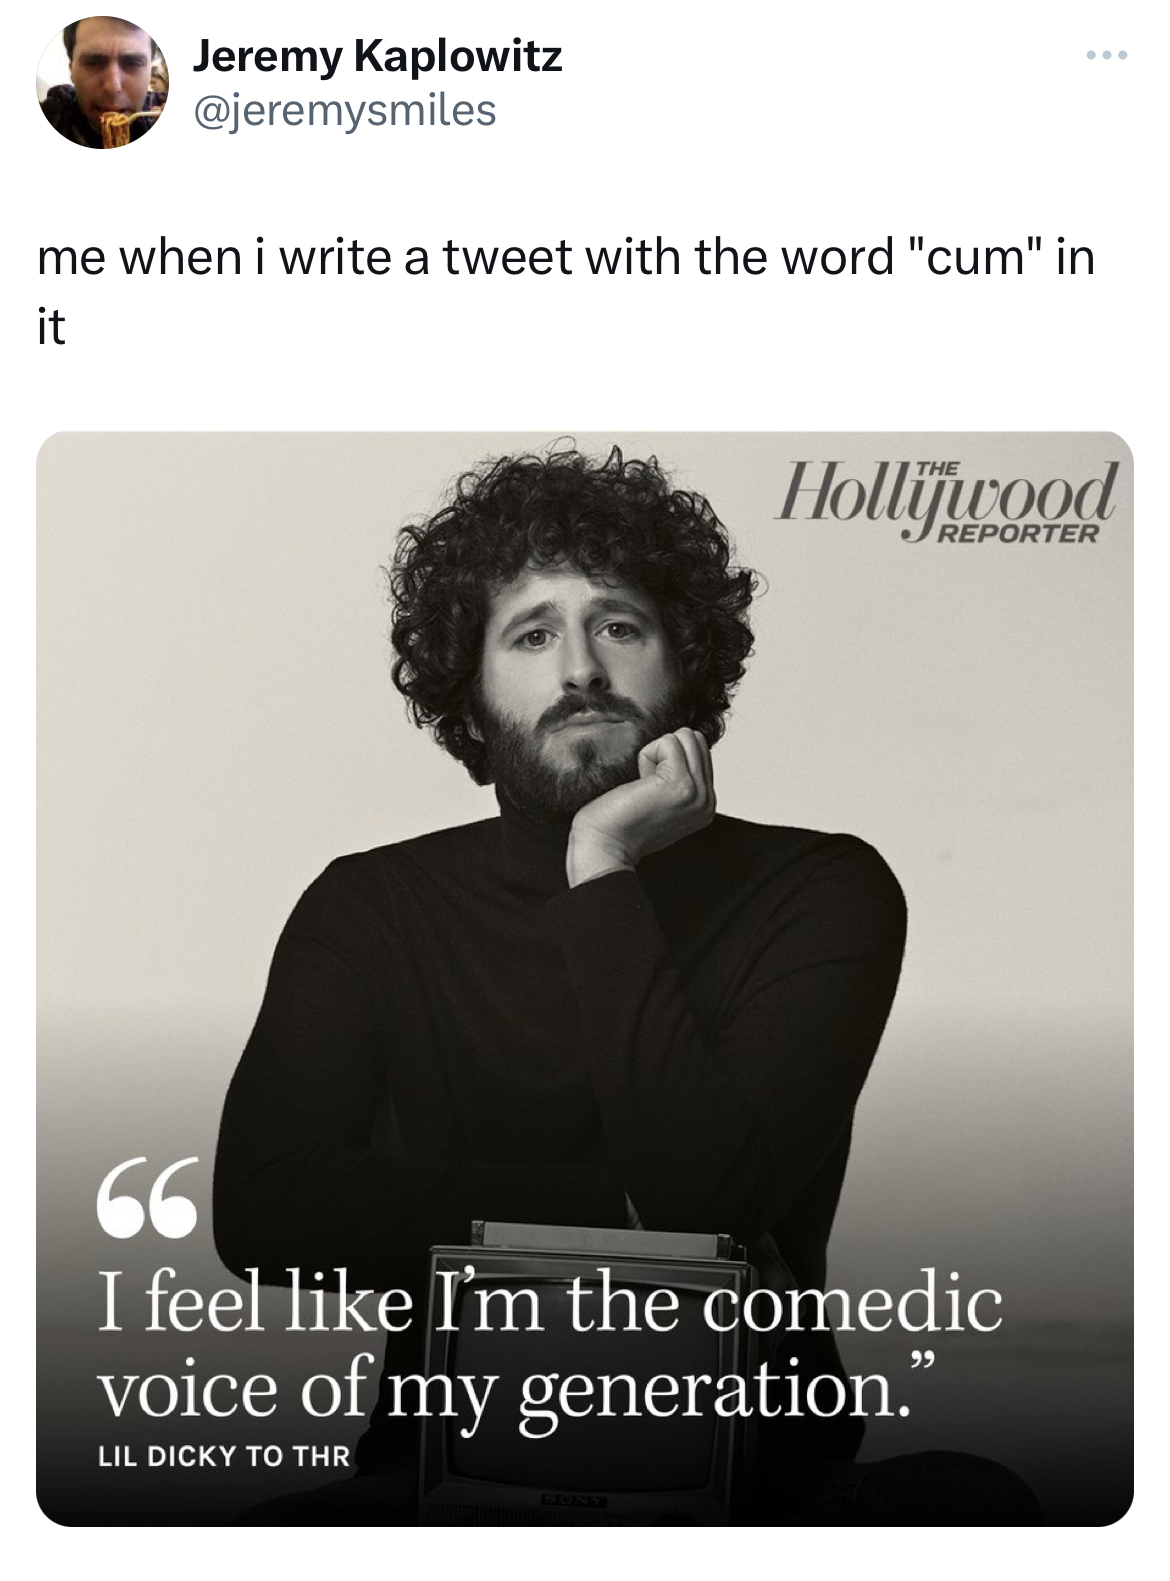 hall of fame tweets -hollywood reporter - Jeremy Kaplowitz me when i write a tweet with the word "cum" in it Hollijwood Reporter 66 I feel I'm the comedic voice of my generation." Lil Dicky To Thr